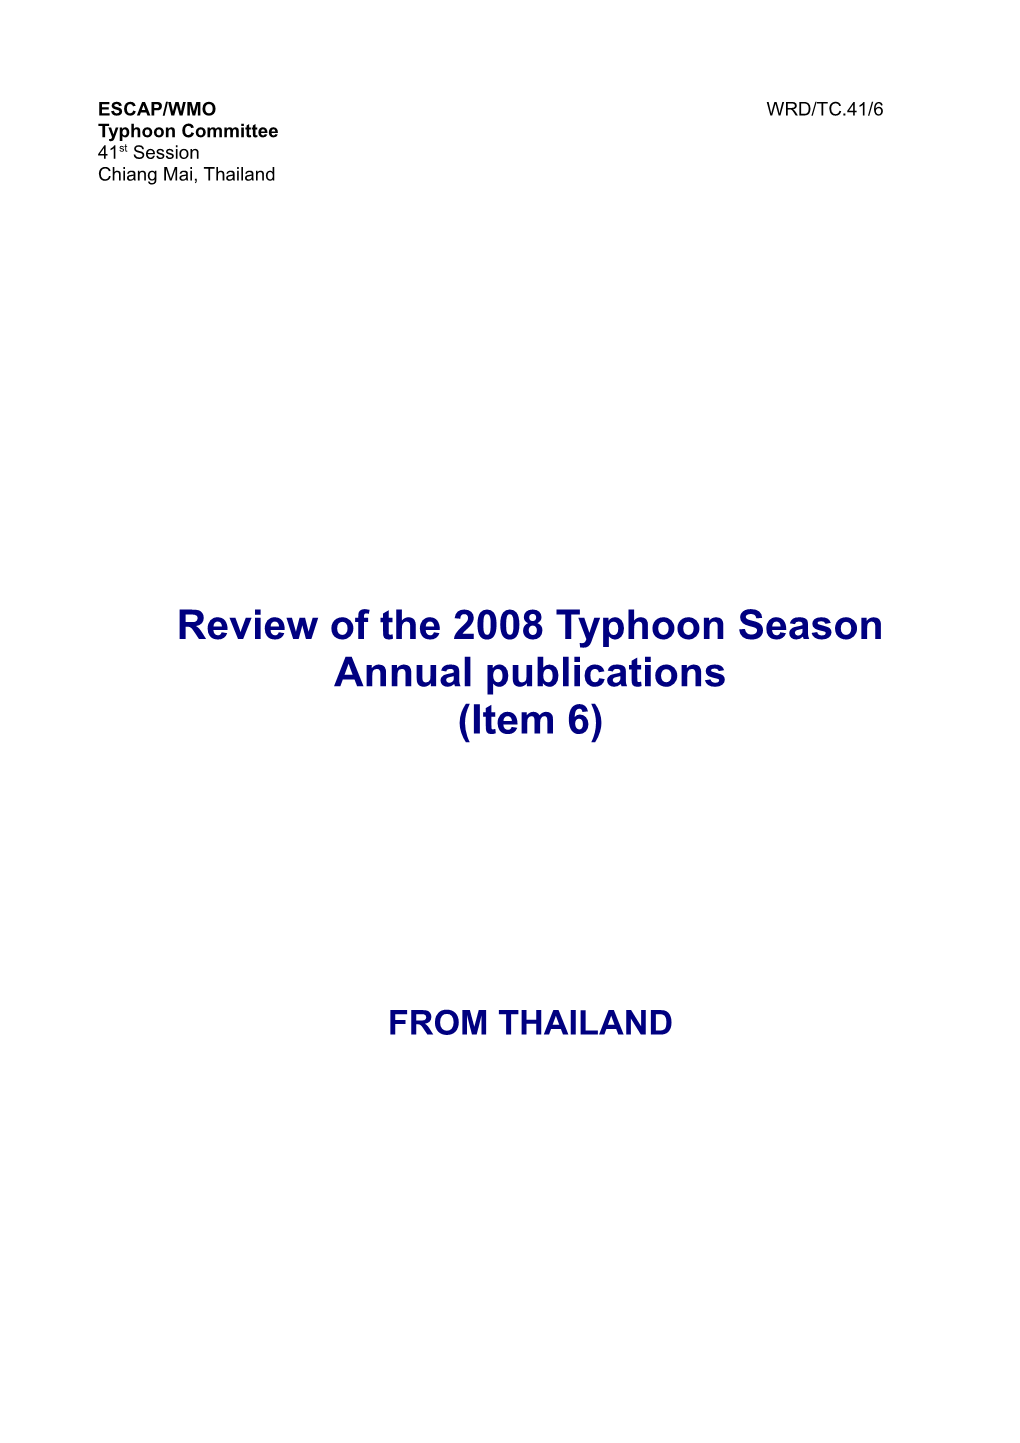 Review of the 2008 Typhoon Season